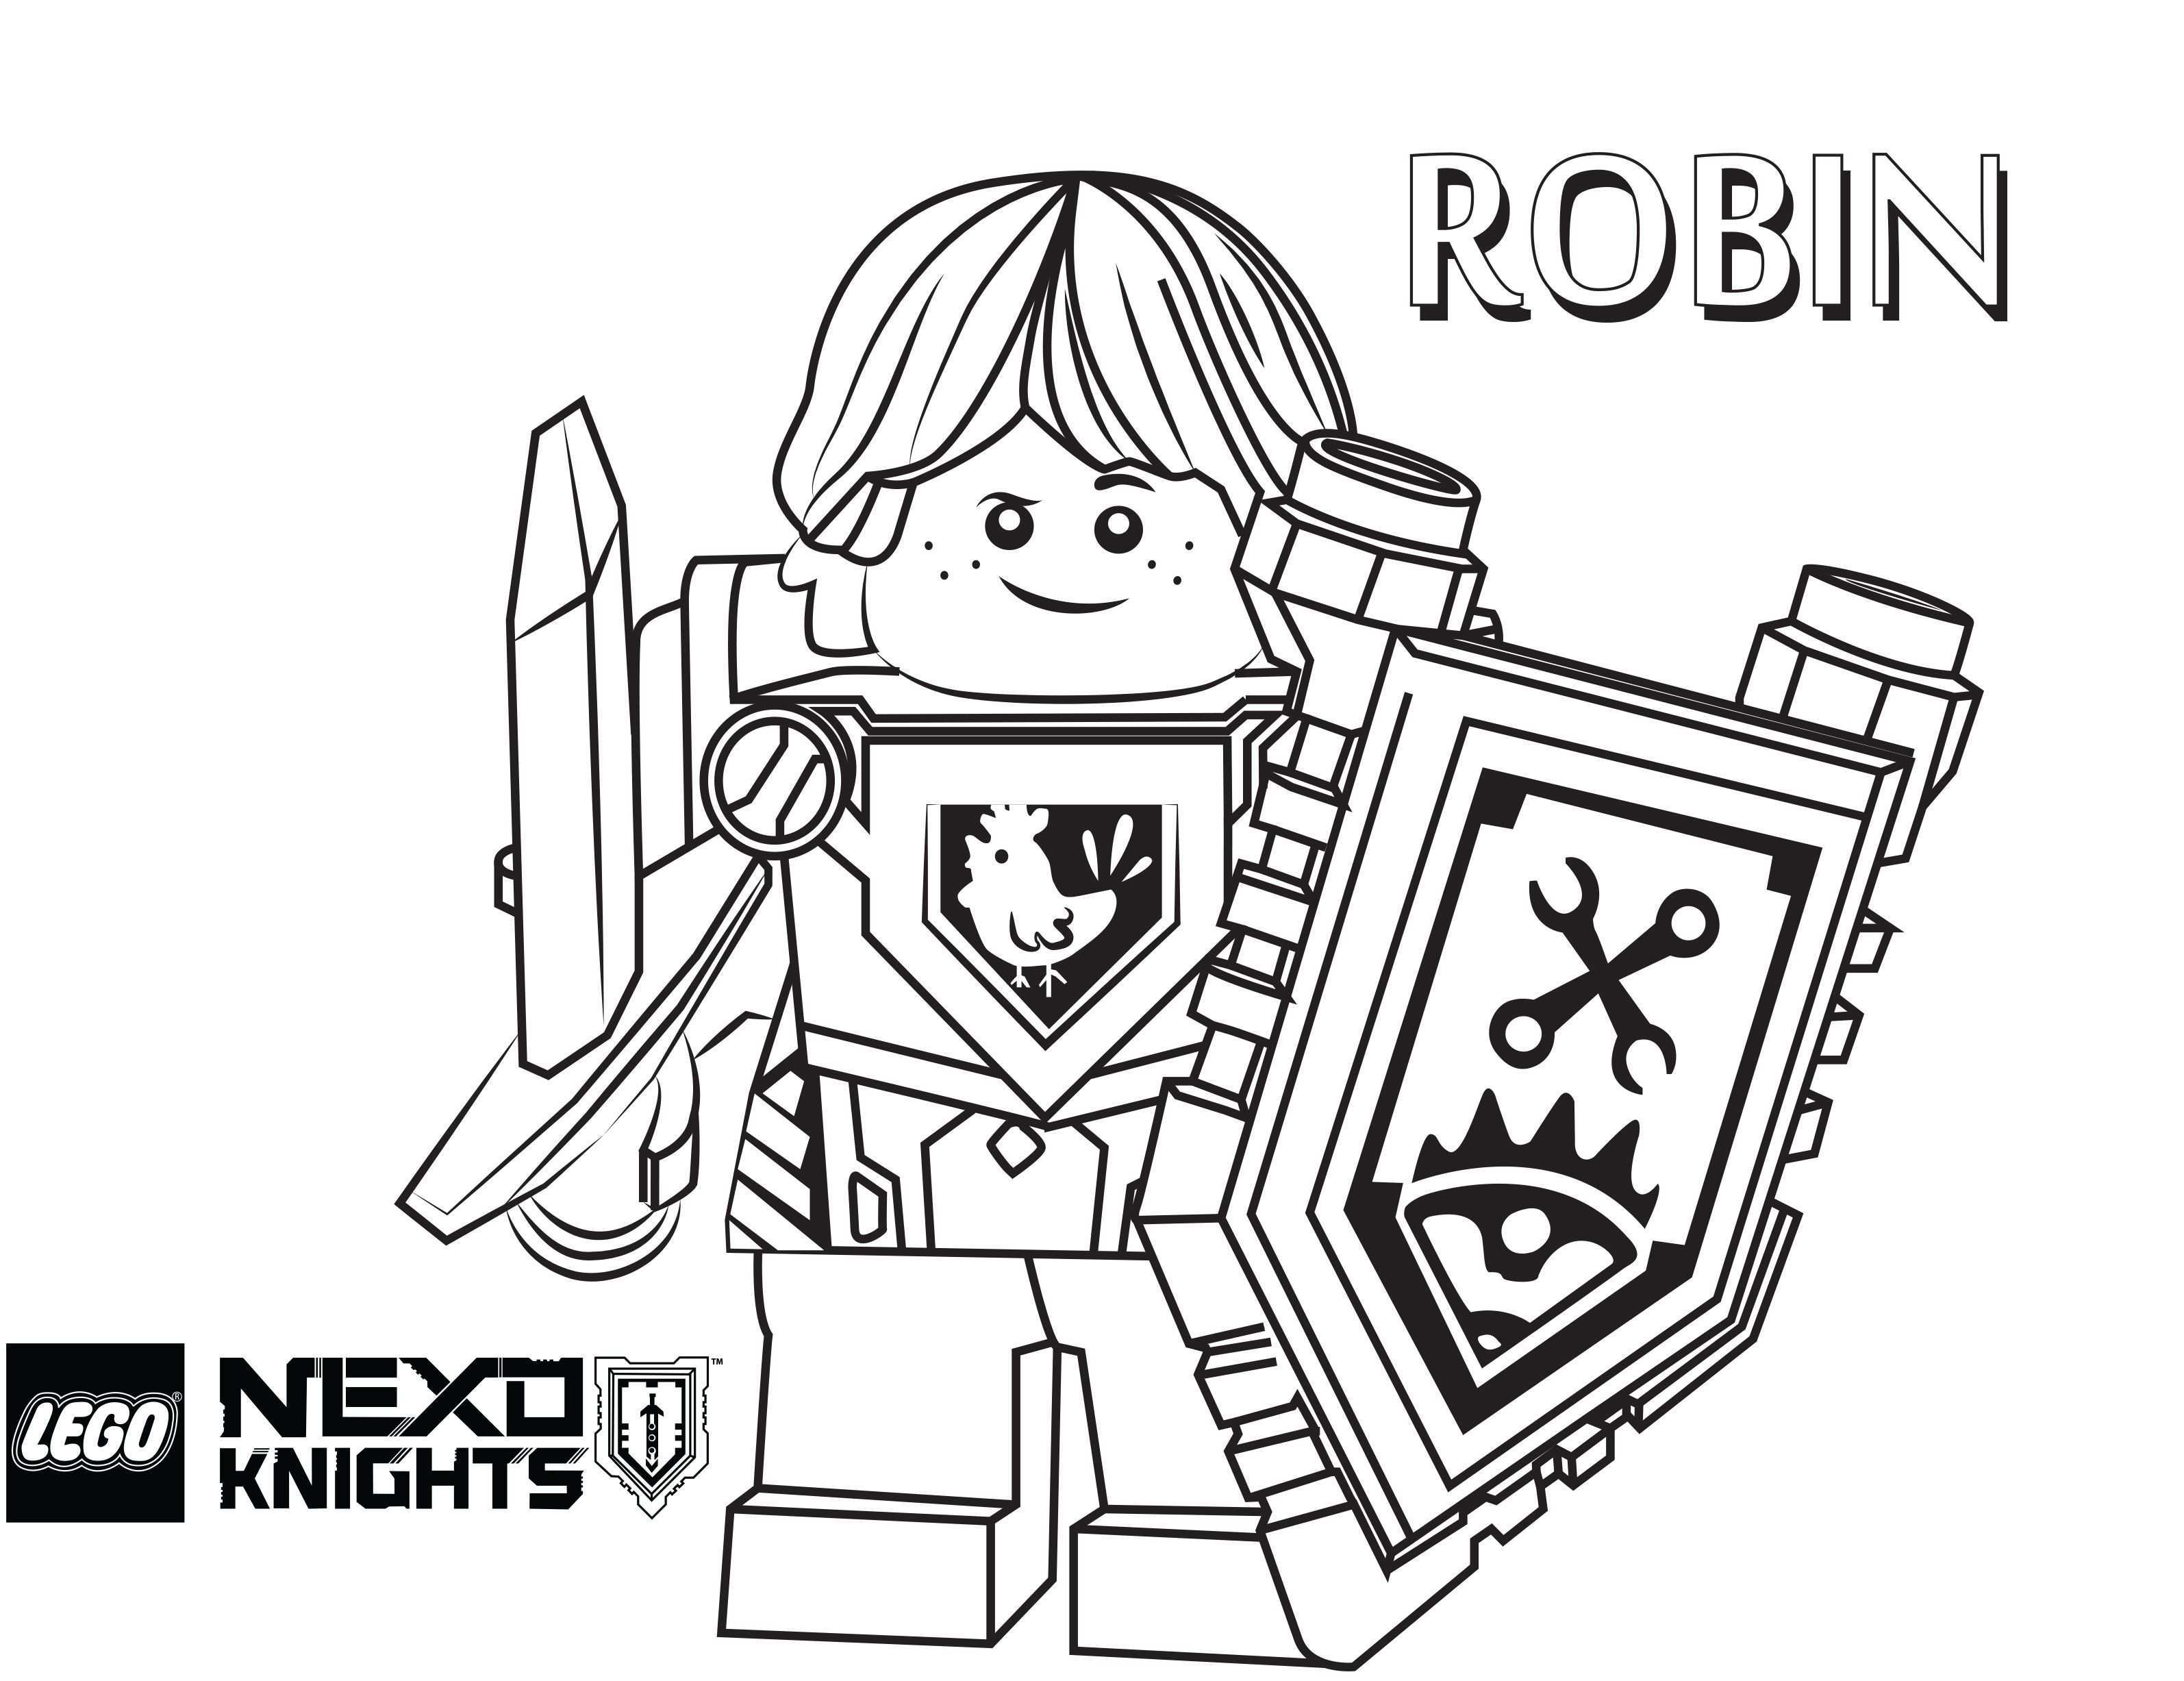 Lego Nexo Knights Coloring Pages Free Printable Lego Nexo Knights Color Sheets Batman